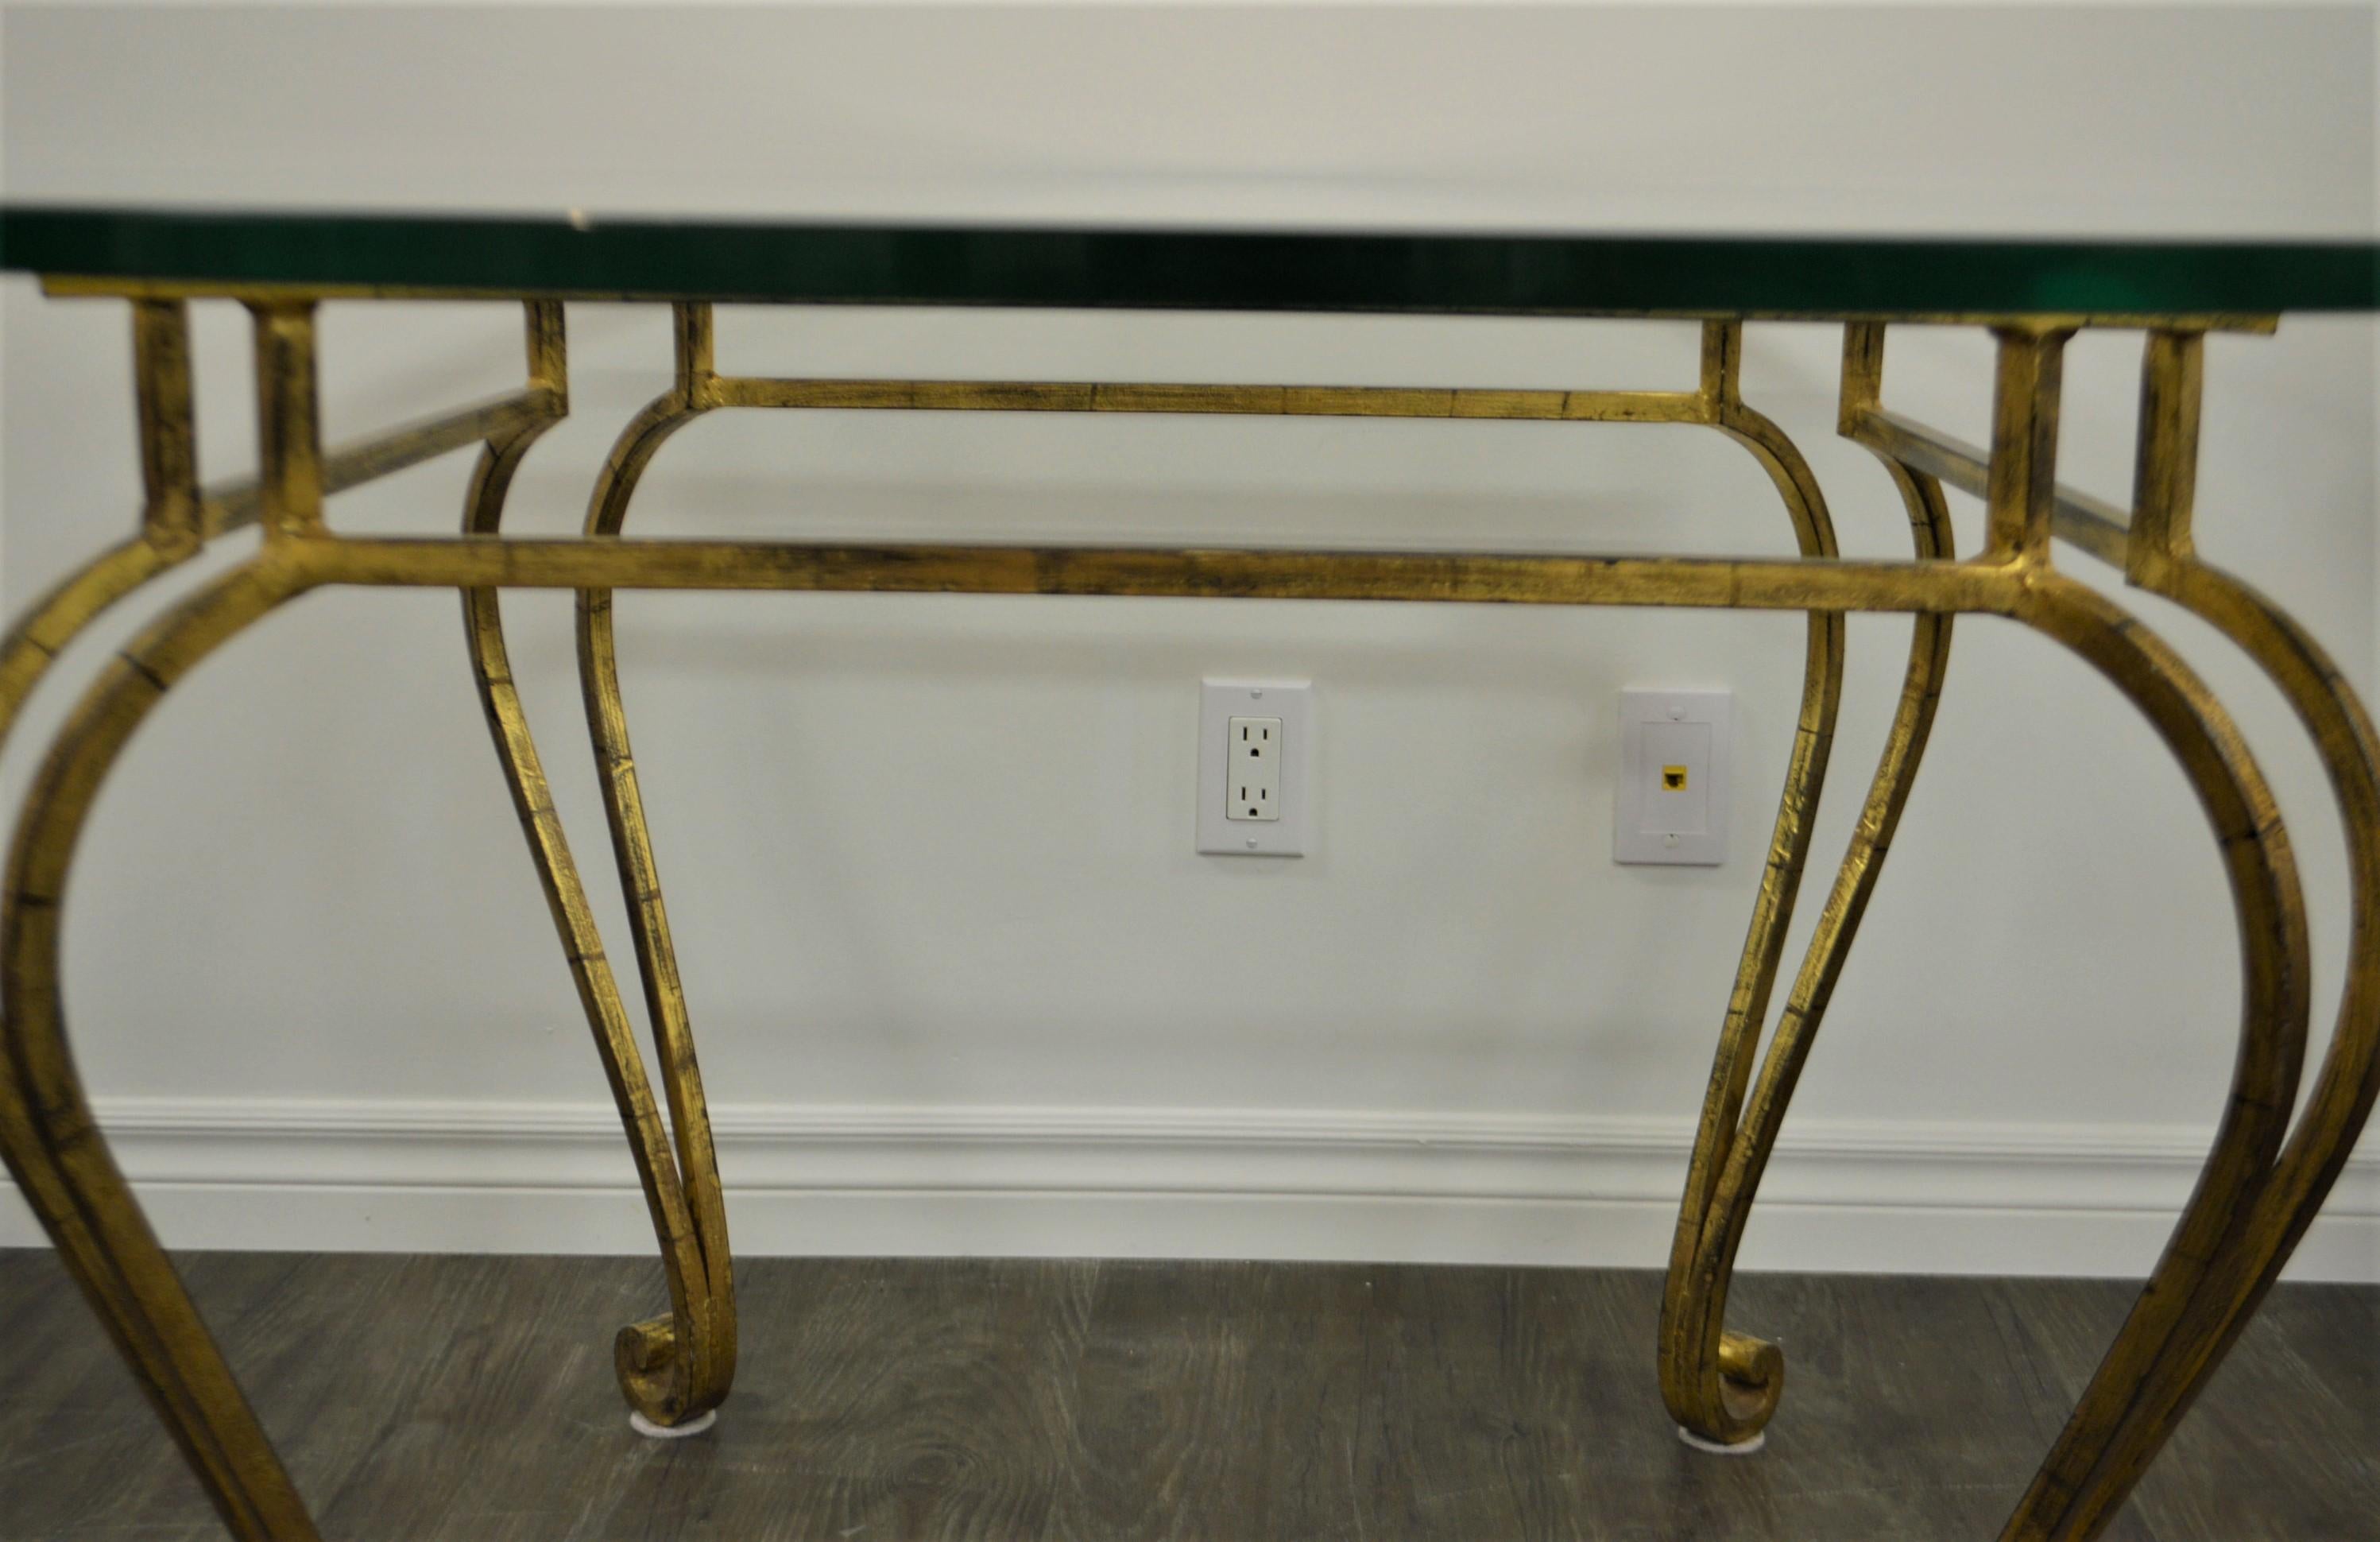 Hollywood Regency wrought iron gilded center table or breakfast, dining table.
Legs are of Louis XV style the table is very solid. The glass top is 3/4